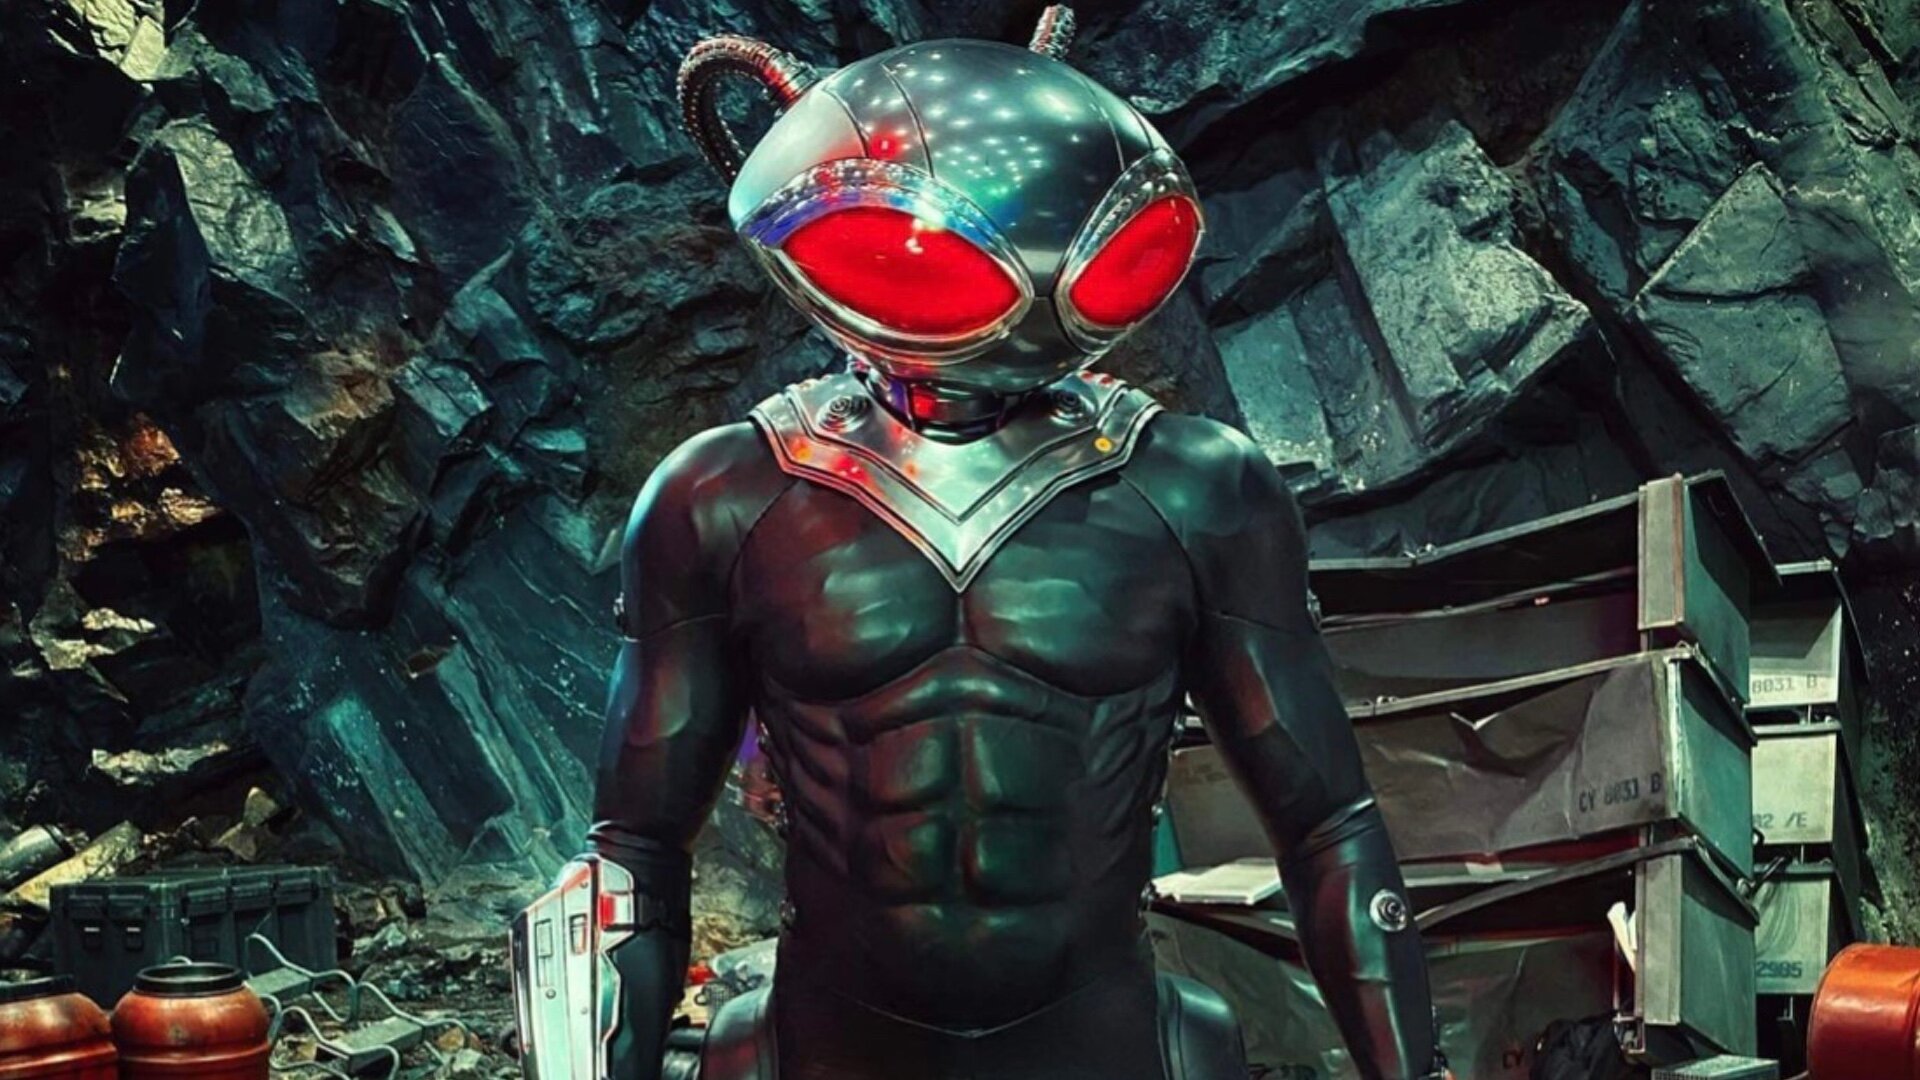 New Photo of Mantis From James Wan's AQUAMAN AND THE LOST KINGDOM